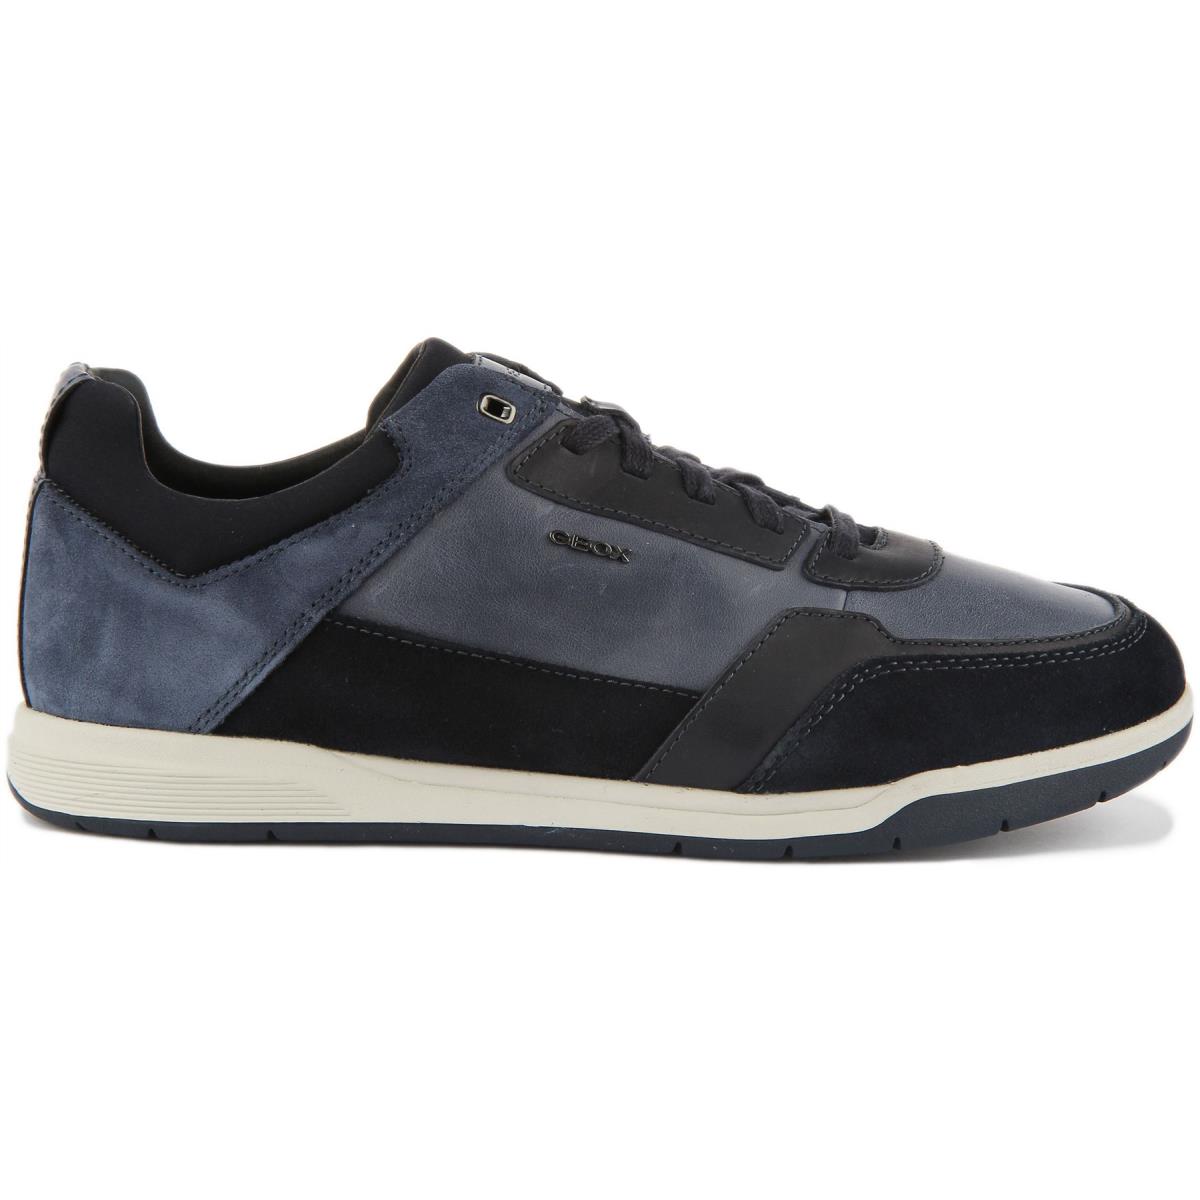 Geox M Spherica A Mens Lace Up Leather Low Sneakers In Navy Size US 7 - 13